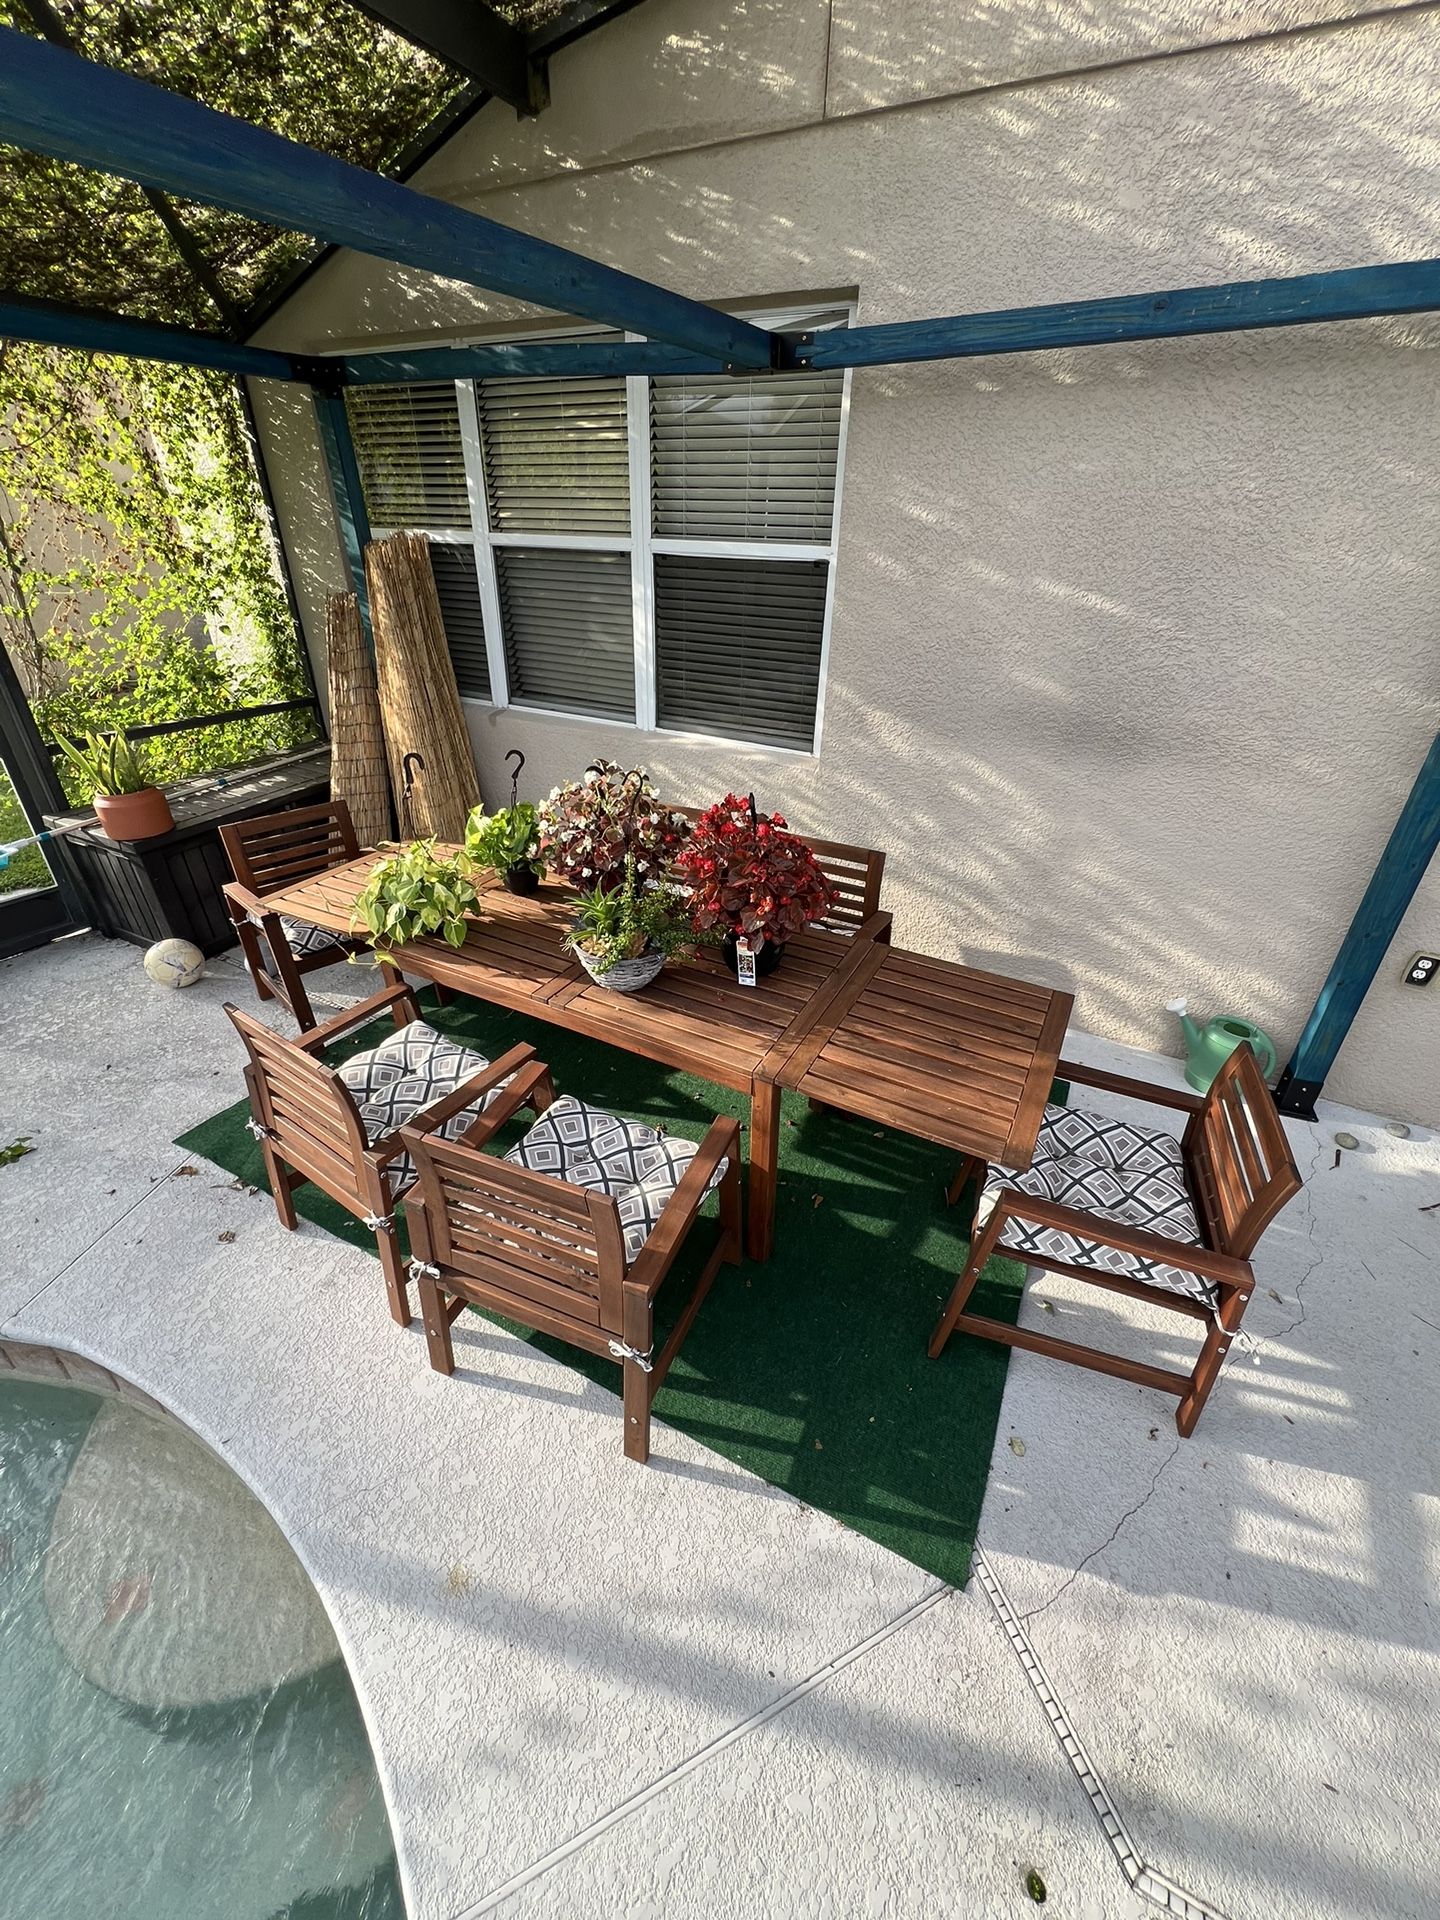 Outdoor Patio Table And Chairs